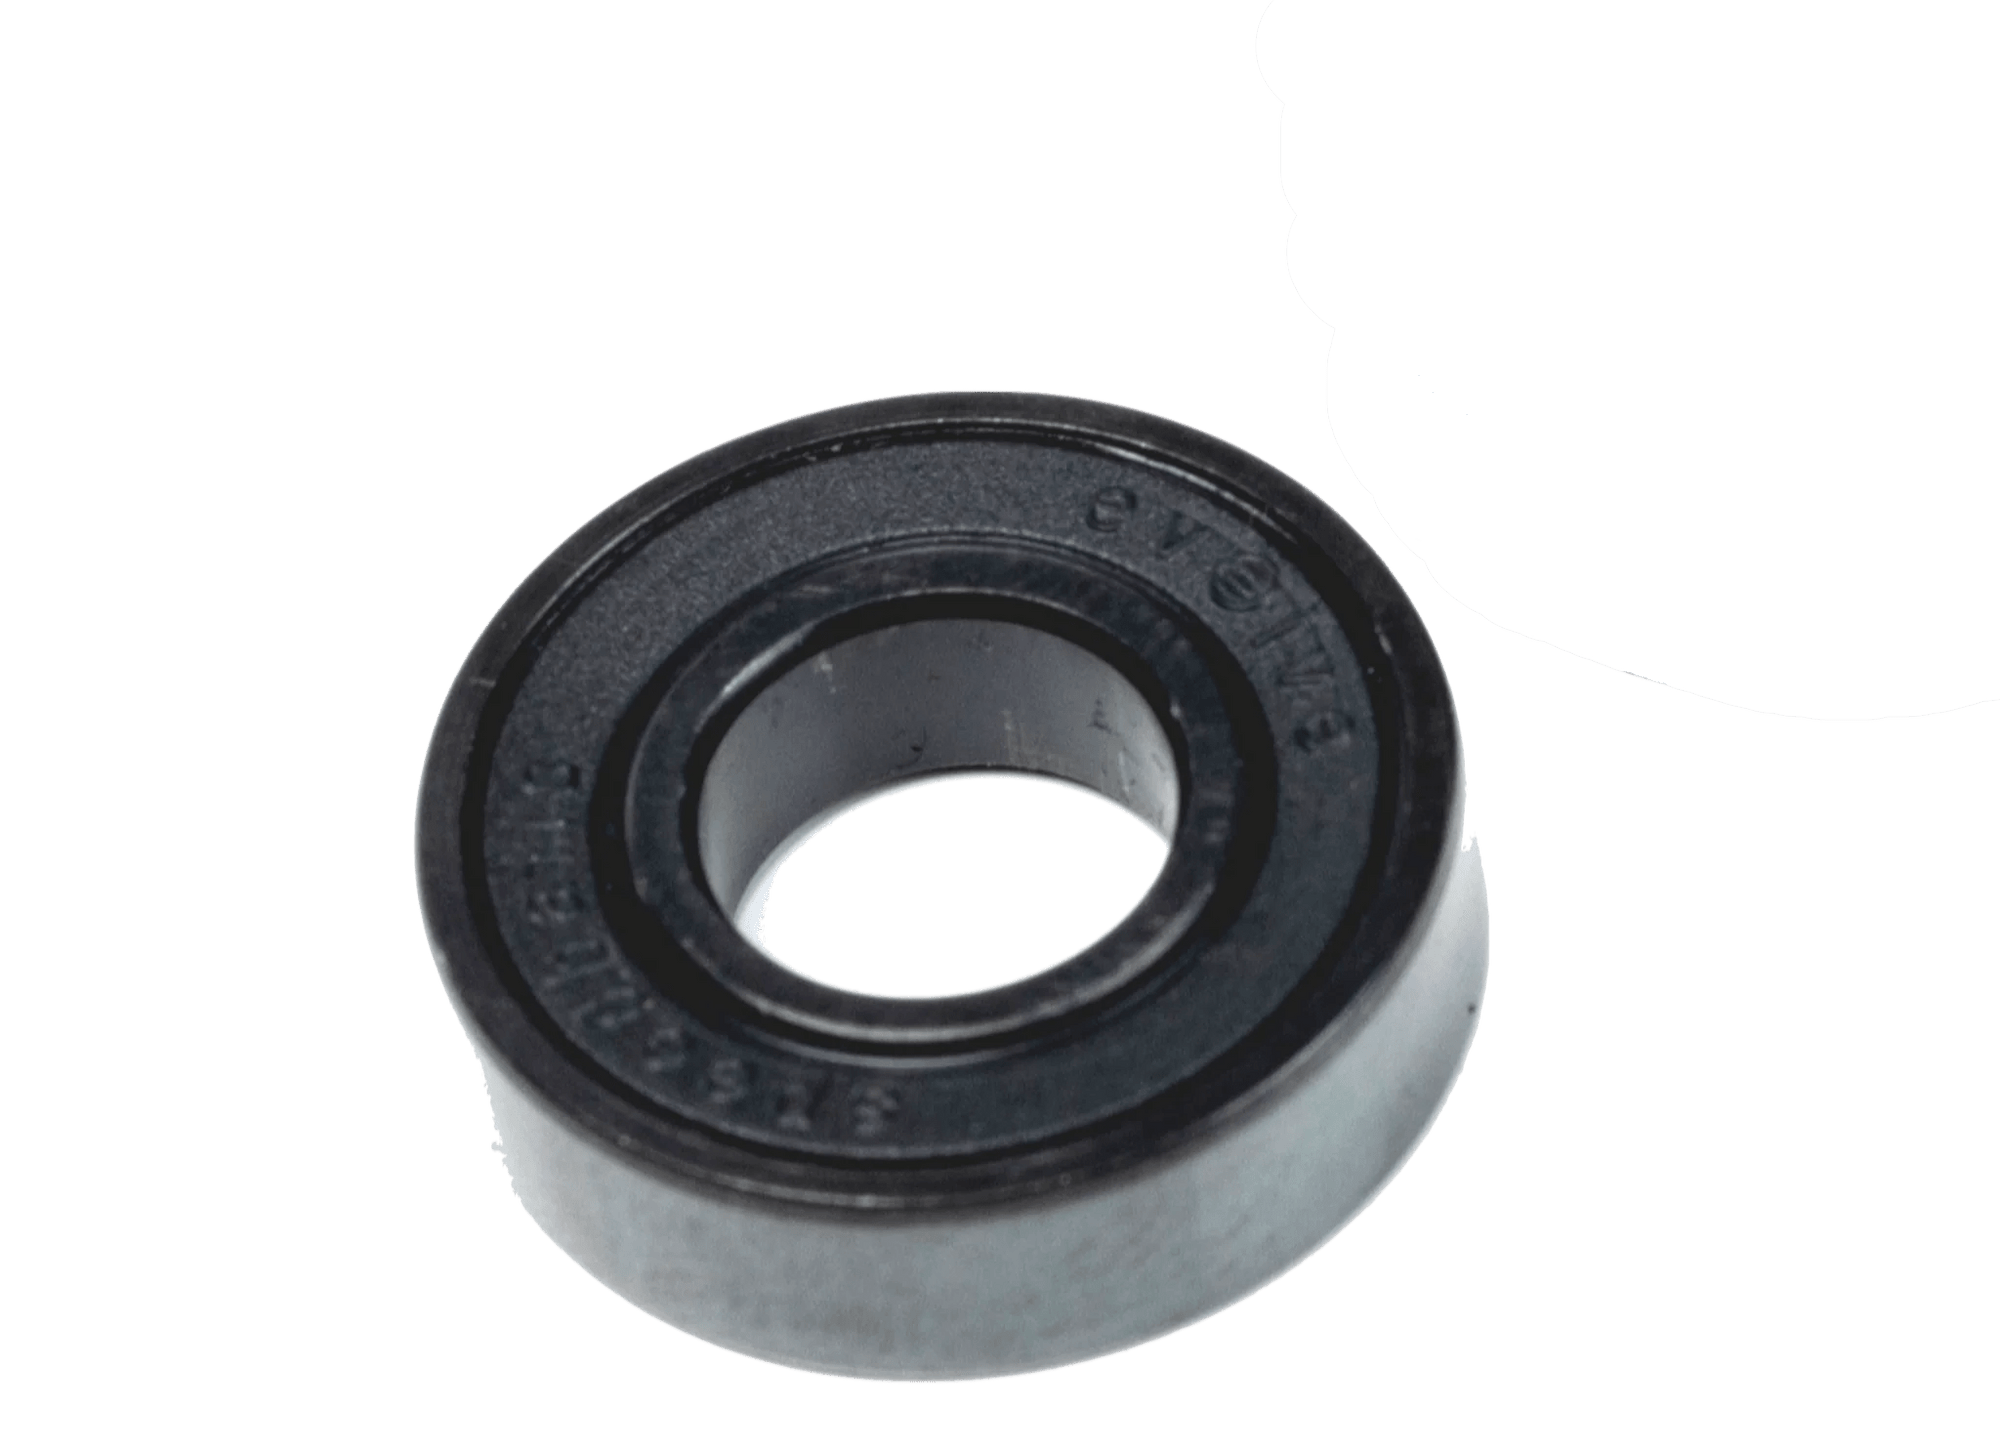 Evolve Replacement Drive Gear Bearing - Electric Skateboard